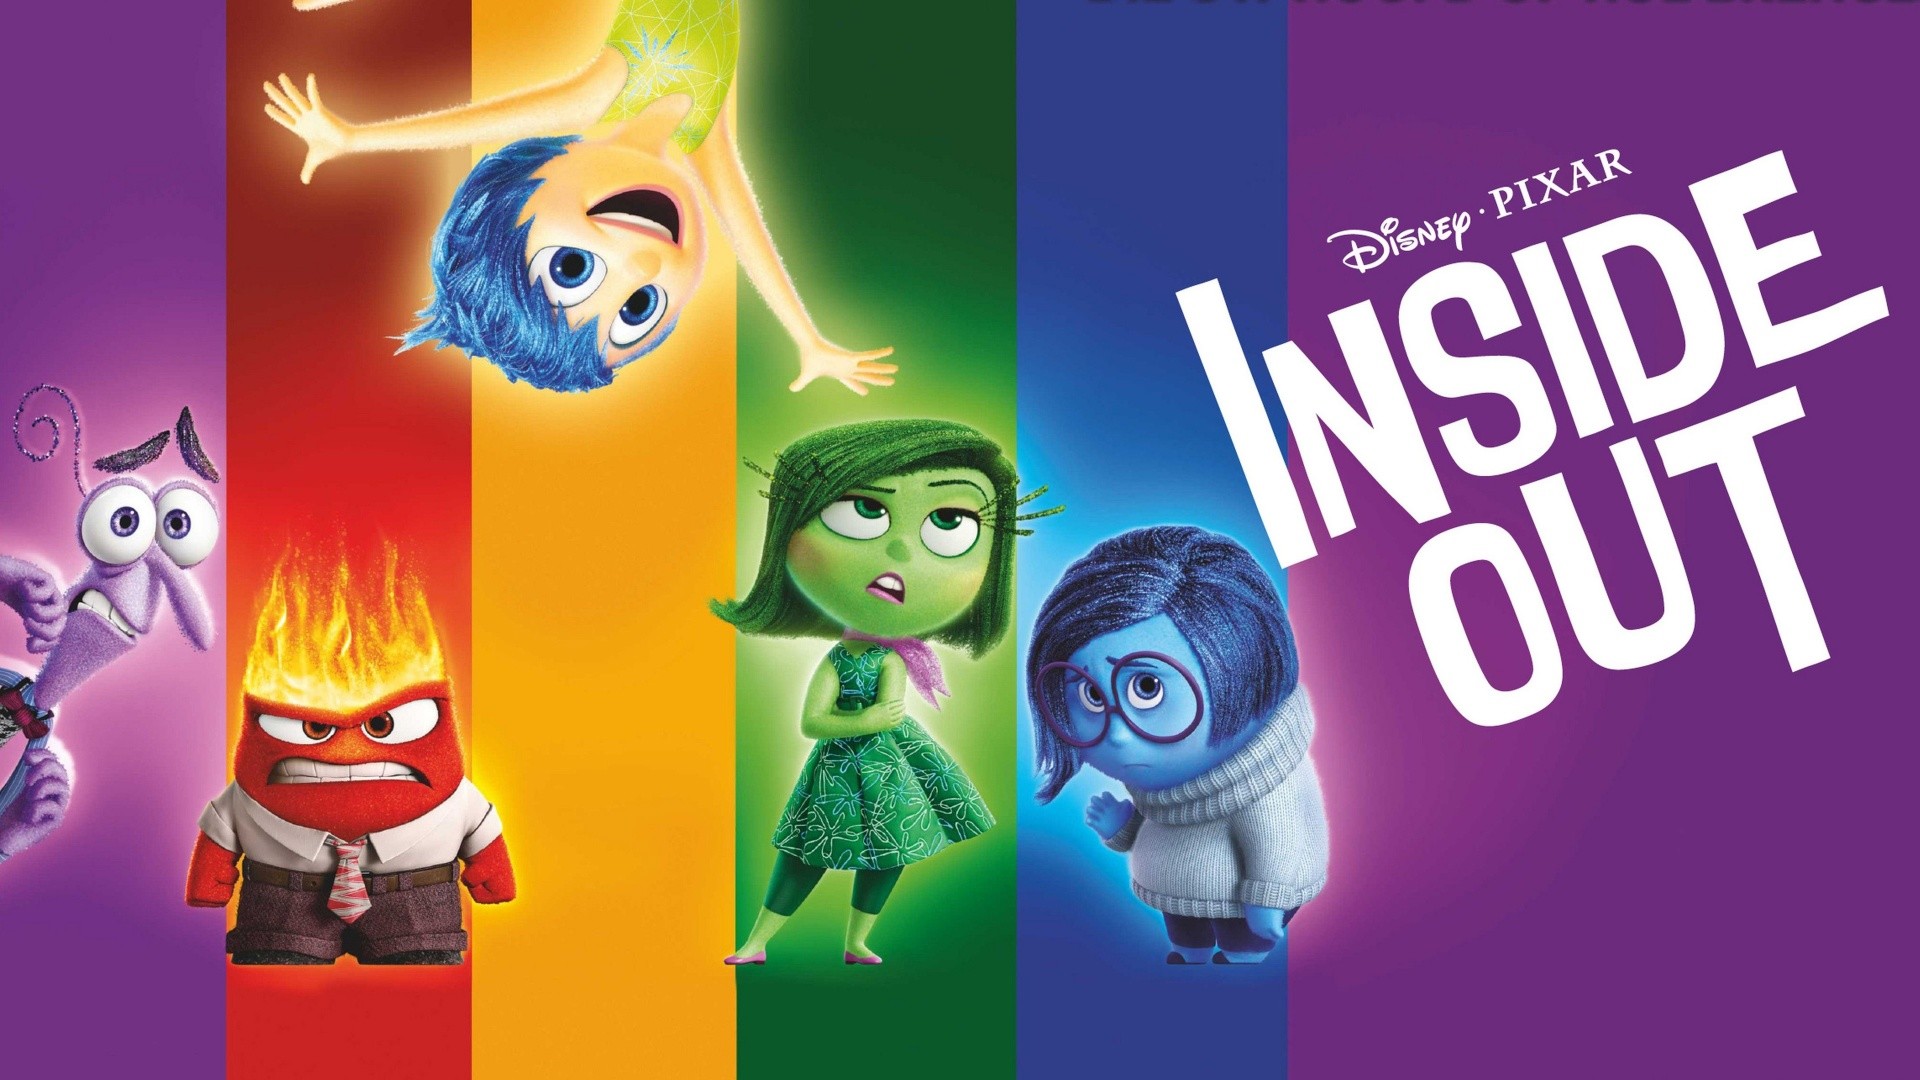 1920x1080 Inside Out 2015 Movie Wallpapers | HD Wallpapers